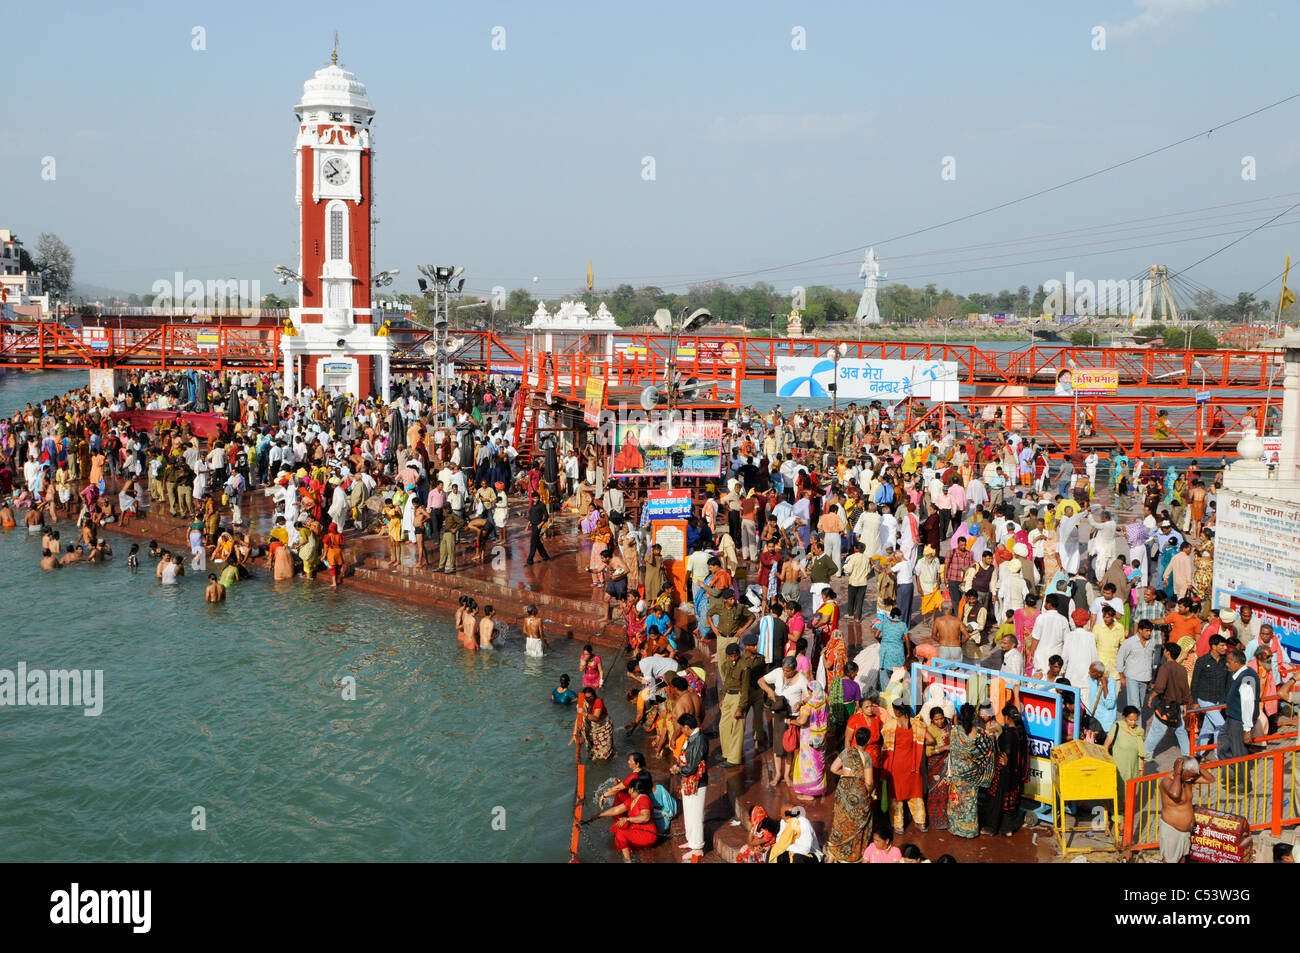 A scene in the city of Haridwar, India Stock Photo